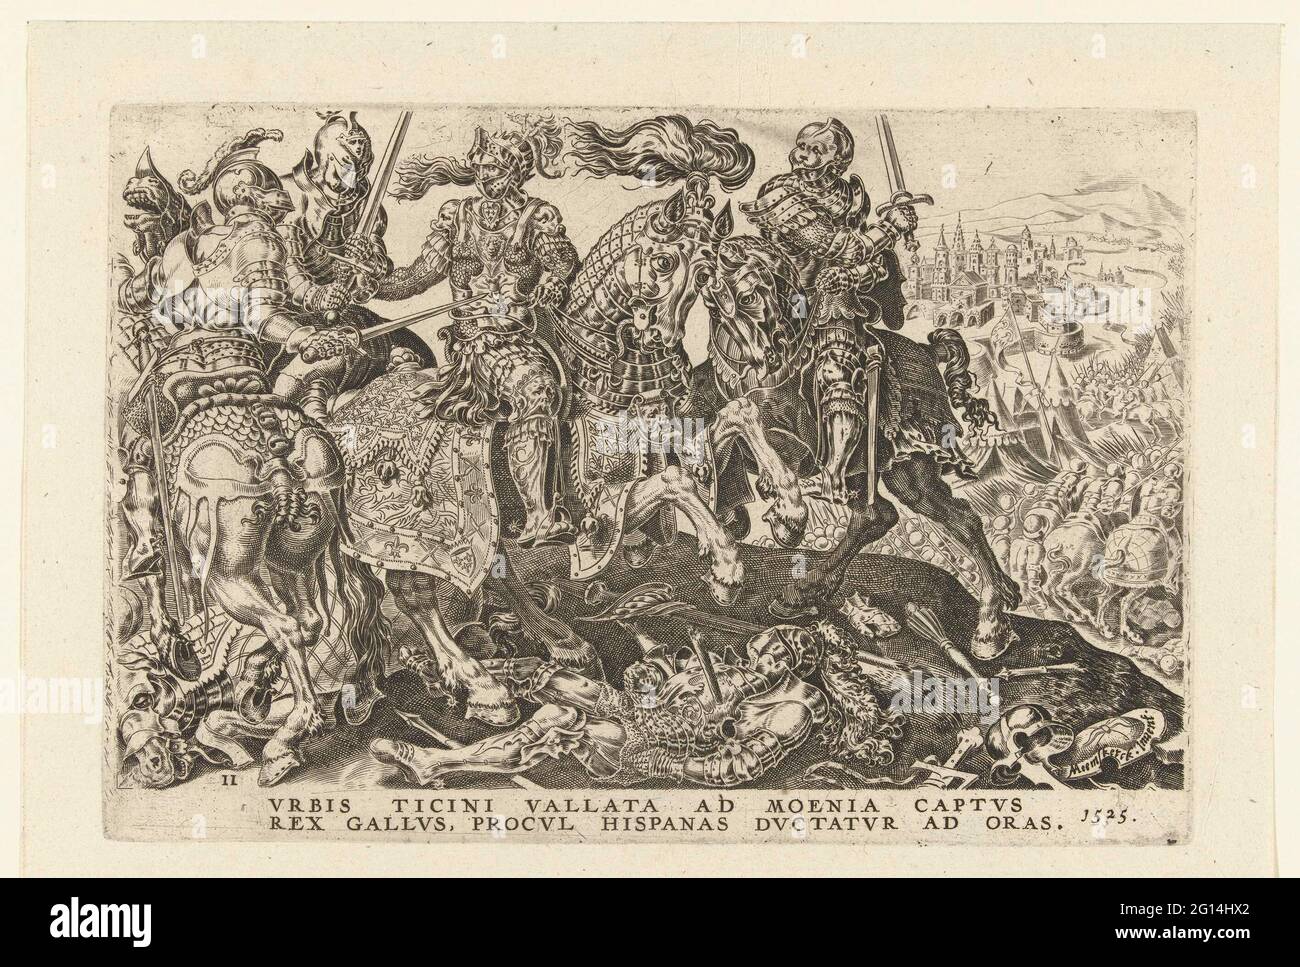 Prisonant of French I during the Battle of Pavia, 1525; Victories of Charles V; Divi Caroli. V. Imp. opt. Max victoriae, ex multis praecipuae. King French I captured during the Battle of Pavia, February 24, 1525. Caption in two Latin lines. Stock Photo